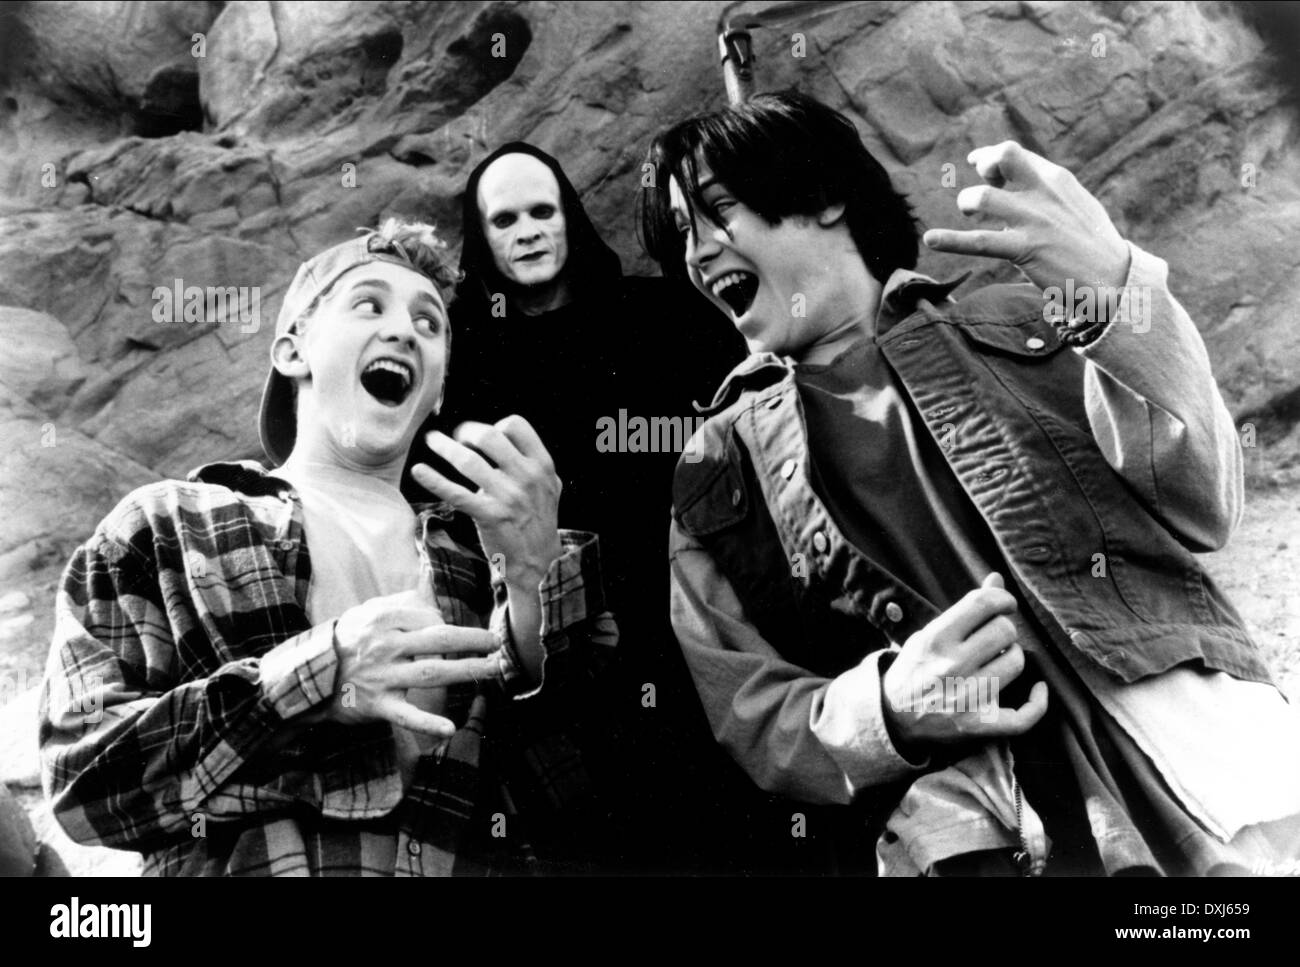 BILL AND TED'S BOGUS JOURNEY Stock Photo